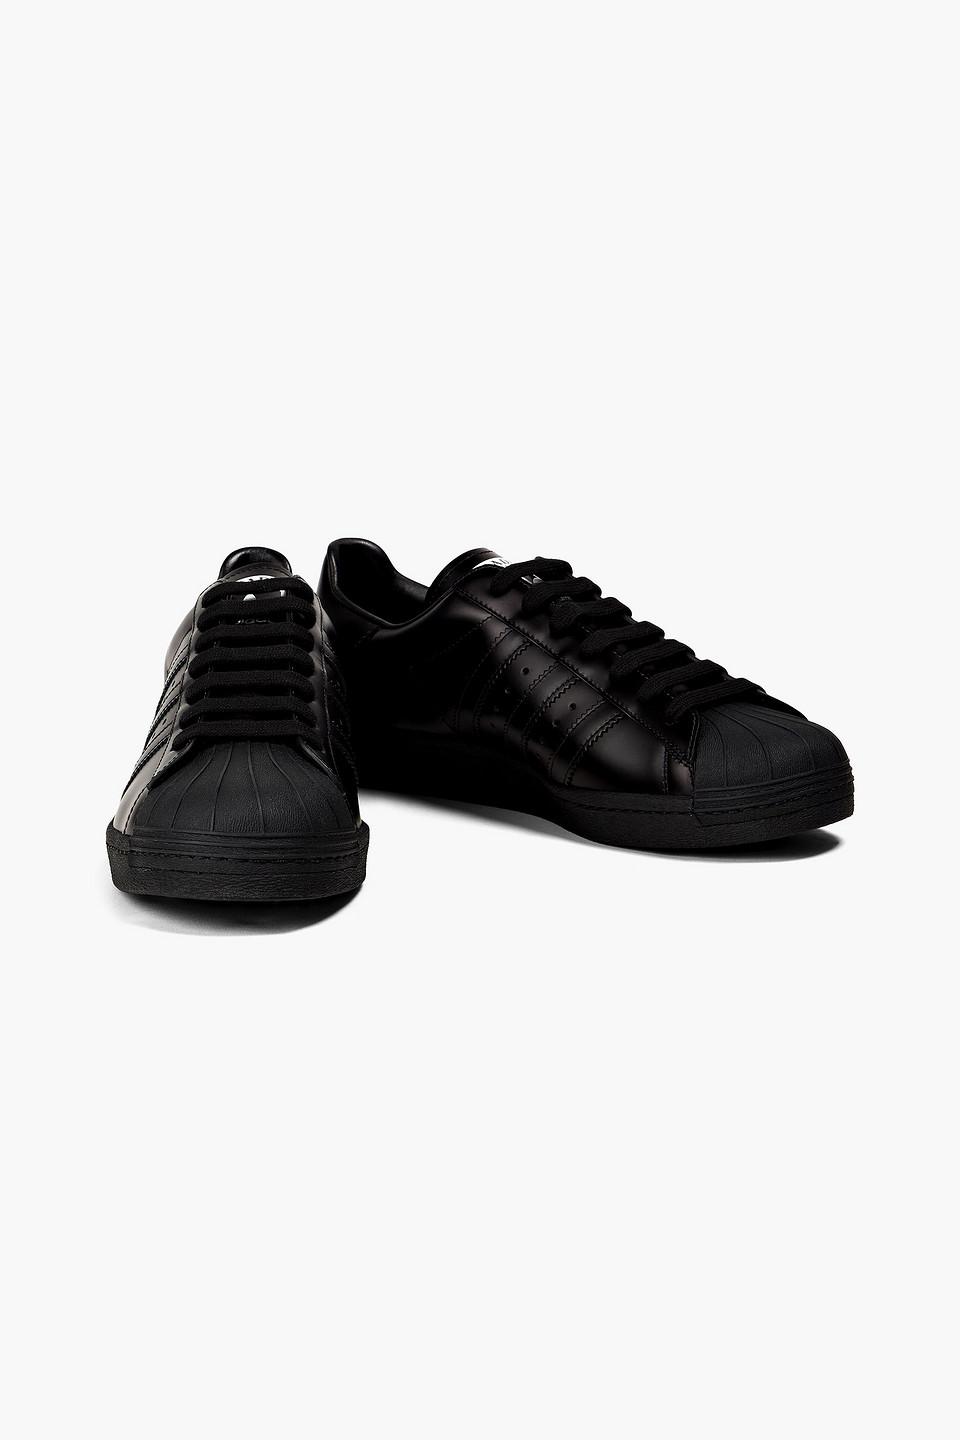 Leather Perforated | Men Black Lyst for in Sneakers adidas